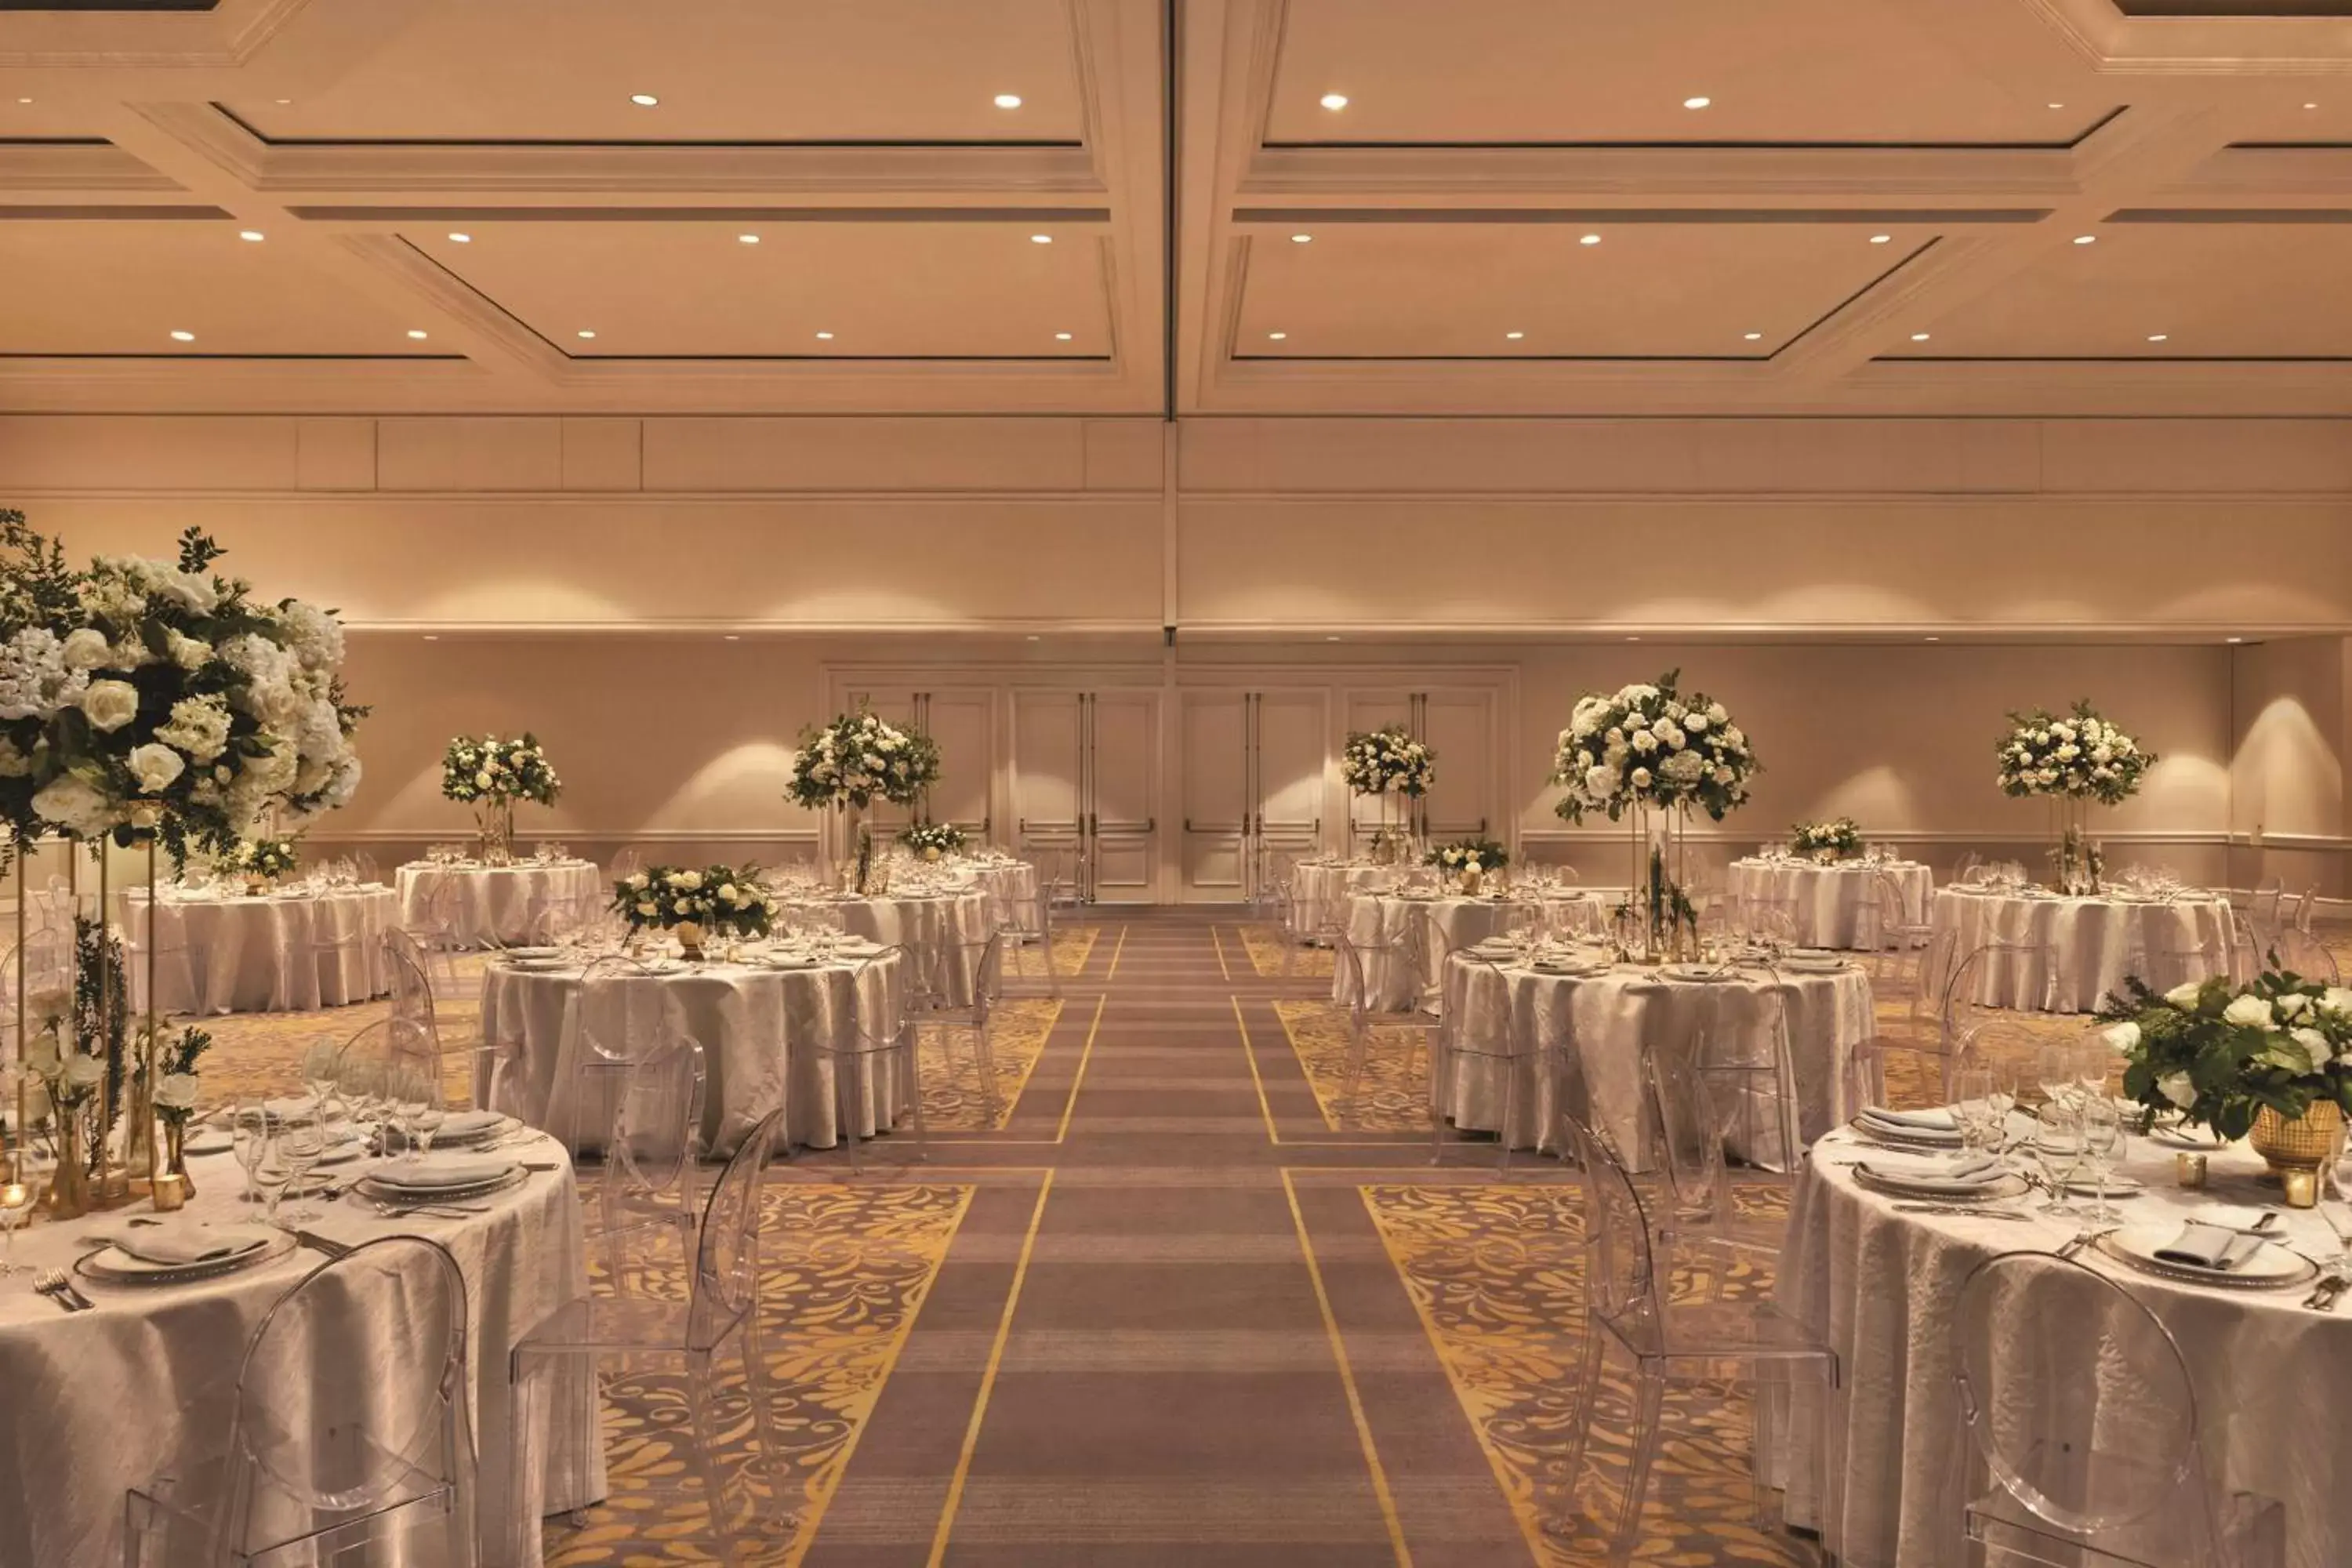 Meeting/conference room, Banquet Facilities in Signia by Hilton San Jose